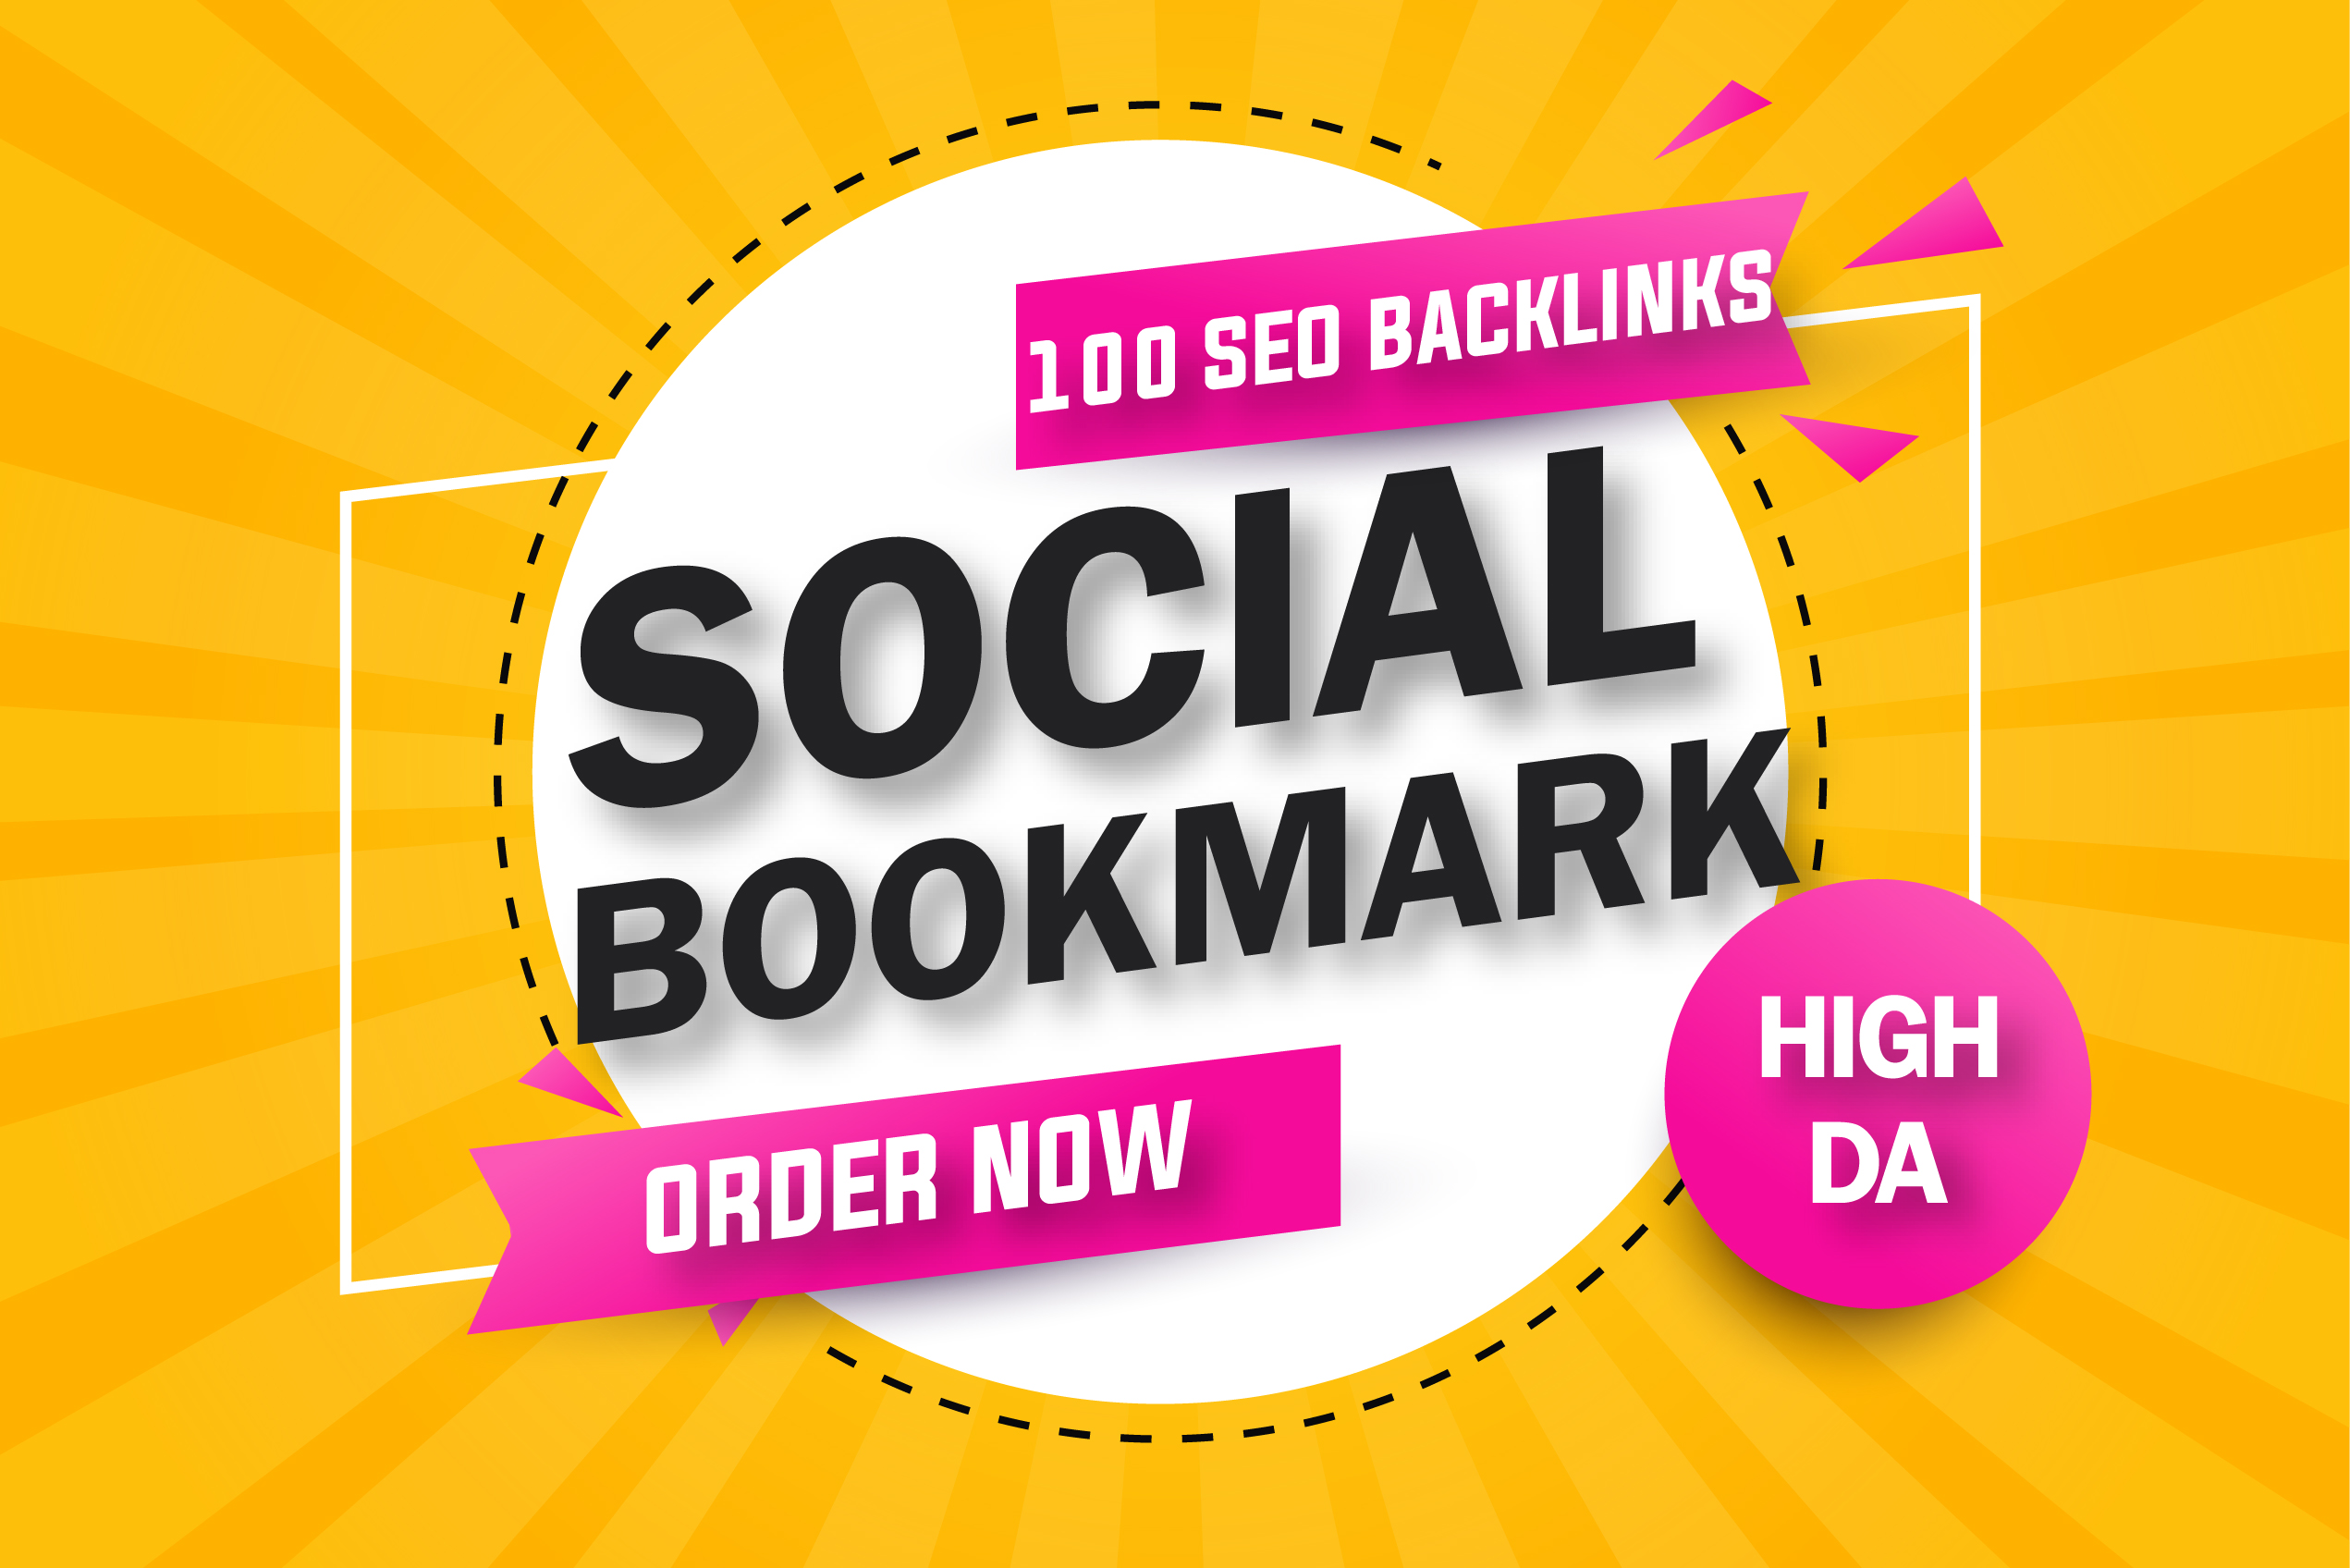 I Will Submit Manual 100 High Quality Social Bookmarking SEO Backlinks